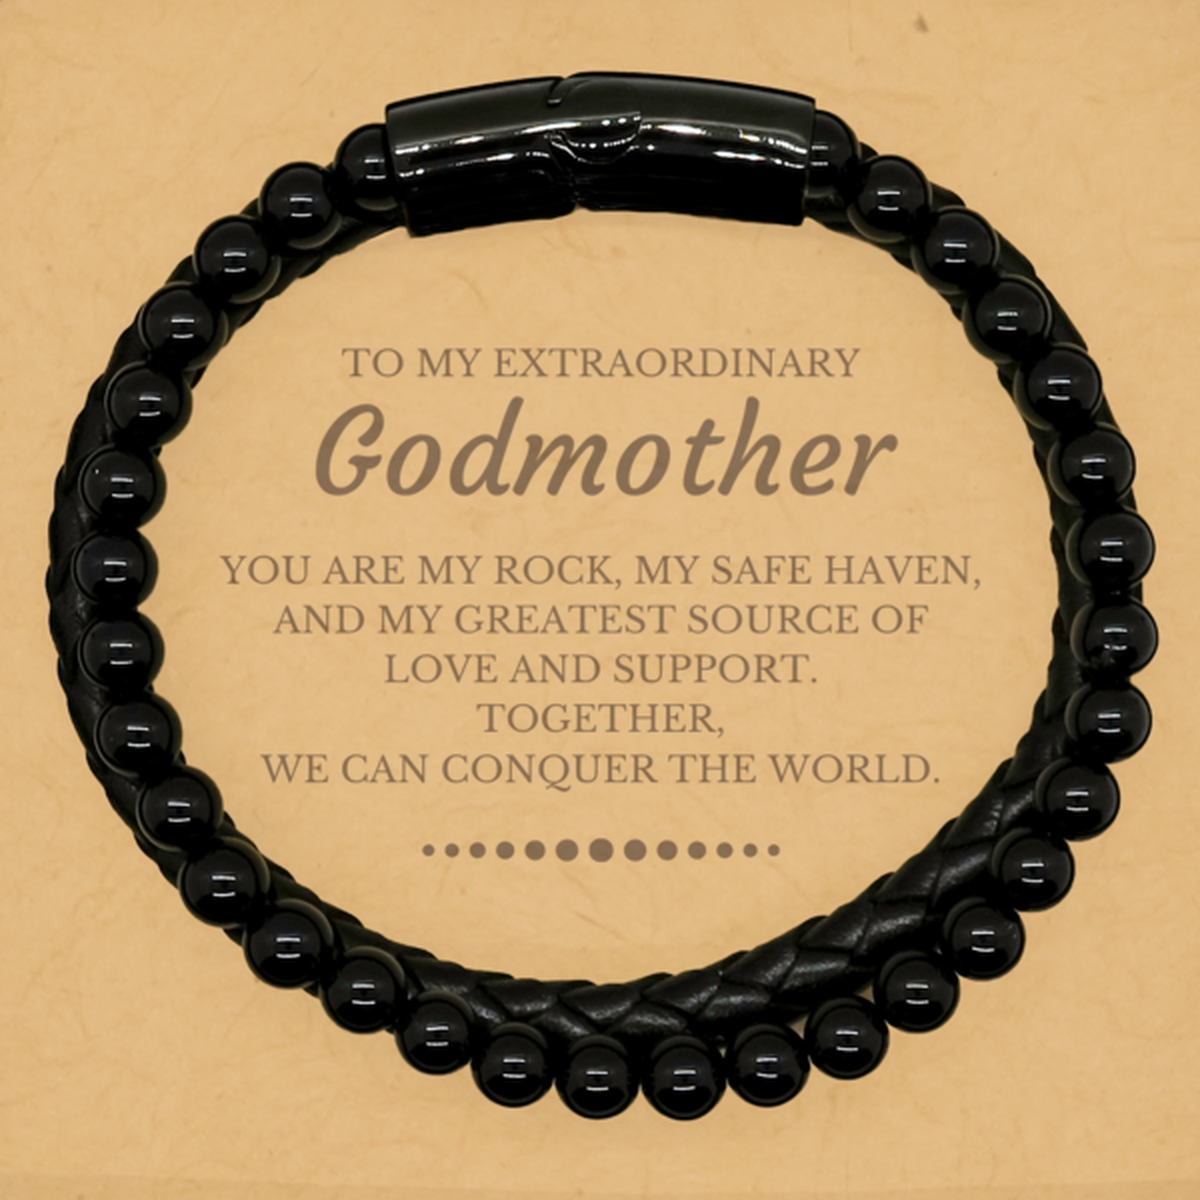 To My Extraordinary Godmother Gifts, Together, we can conquer the world, Birthday Stone Leather Bracelets For Godmother, Christmas Gifts For Godmother